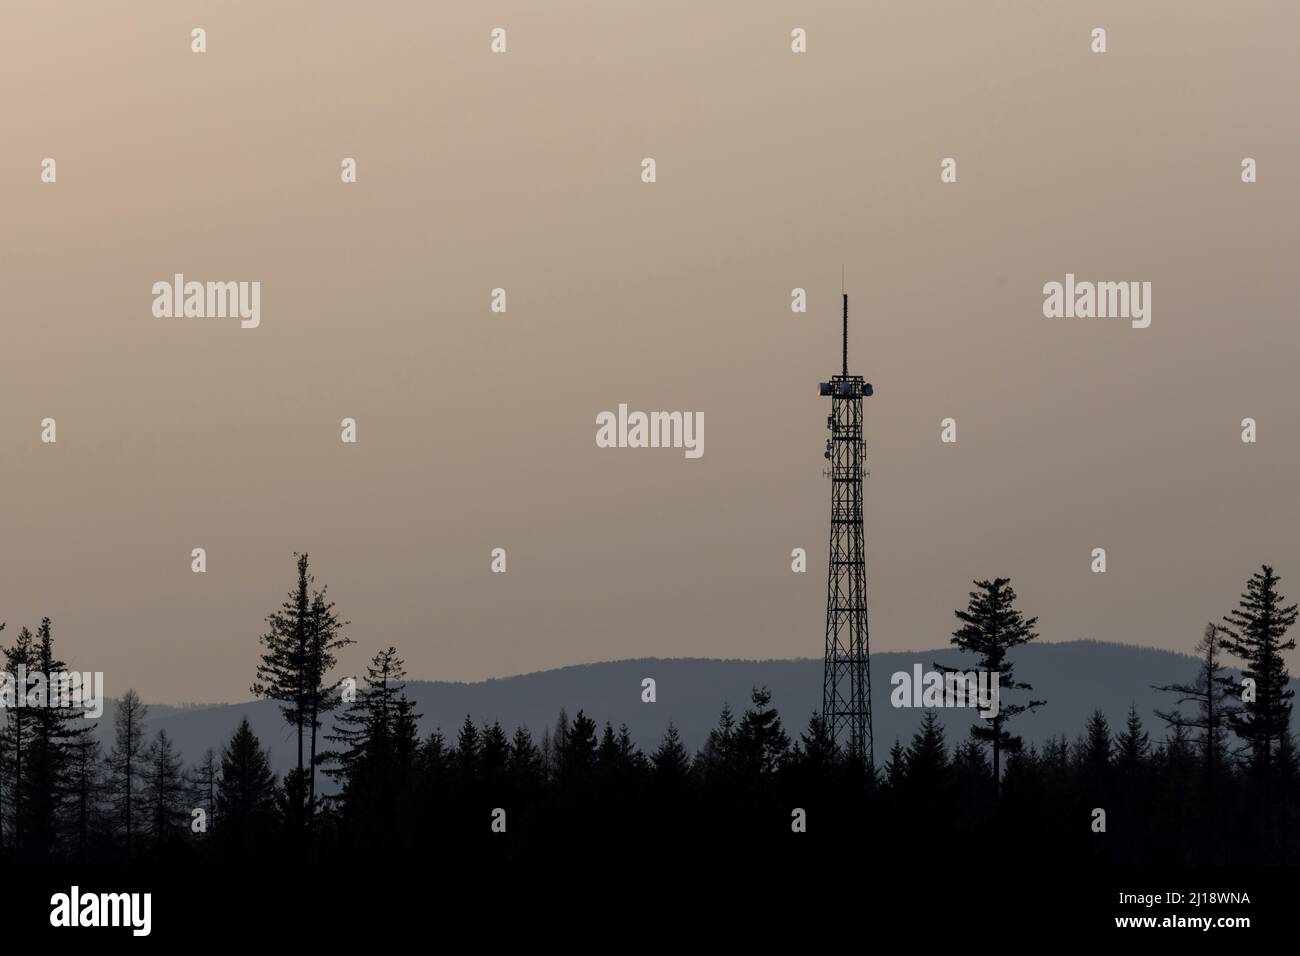 a radio tower in nature silhouette Stock Photo